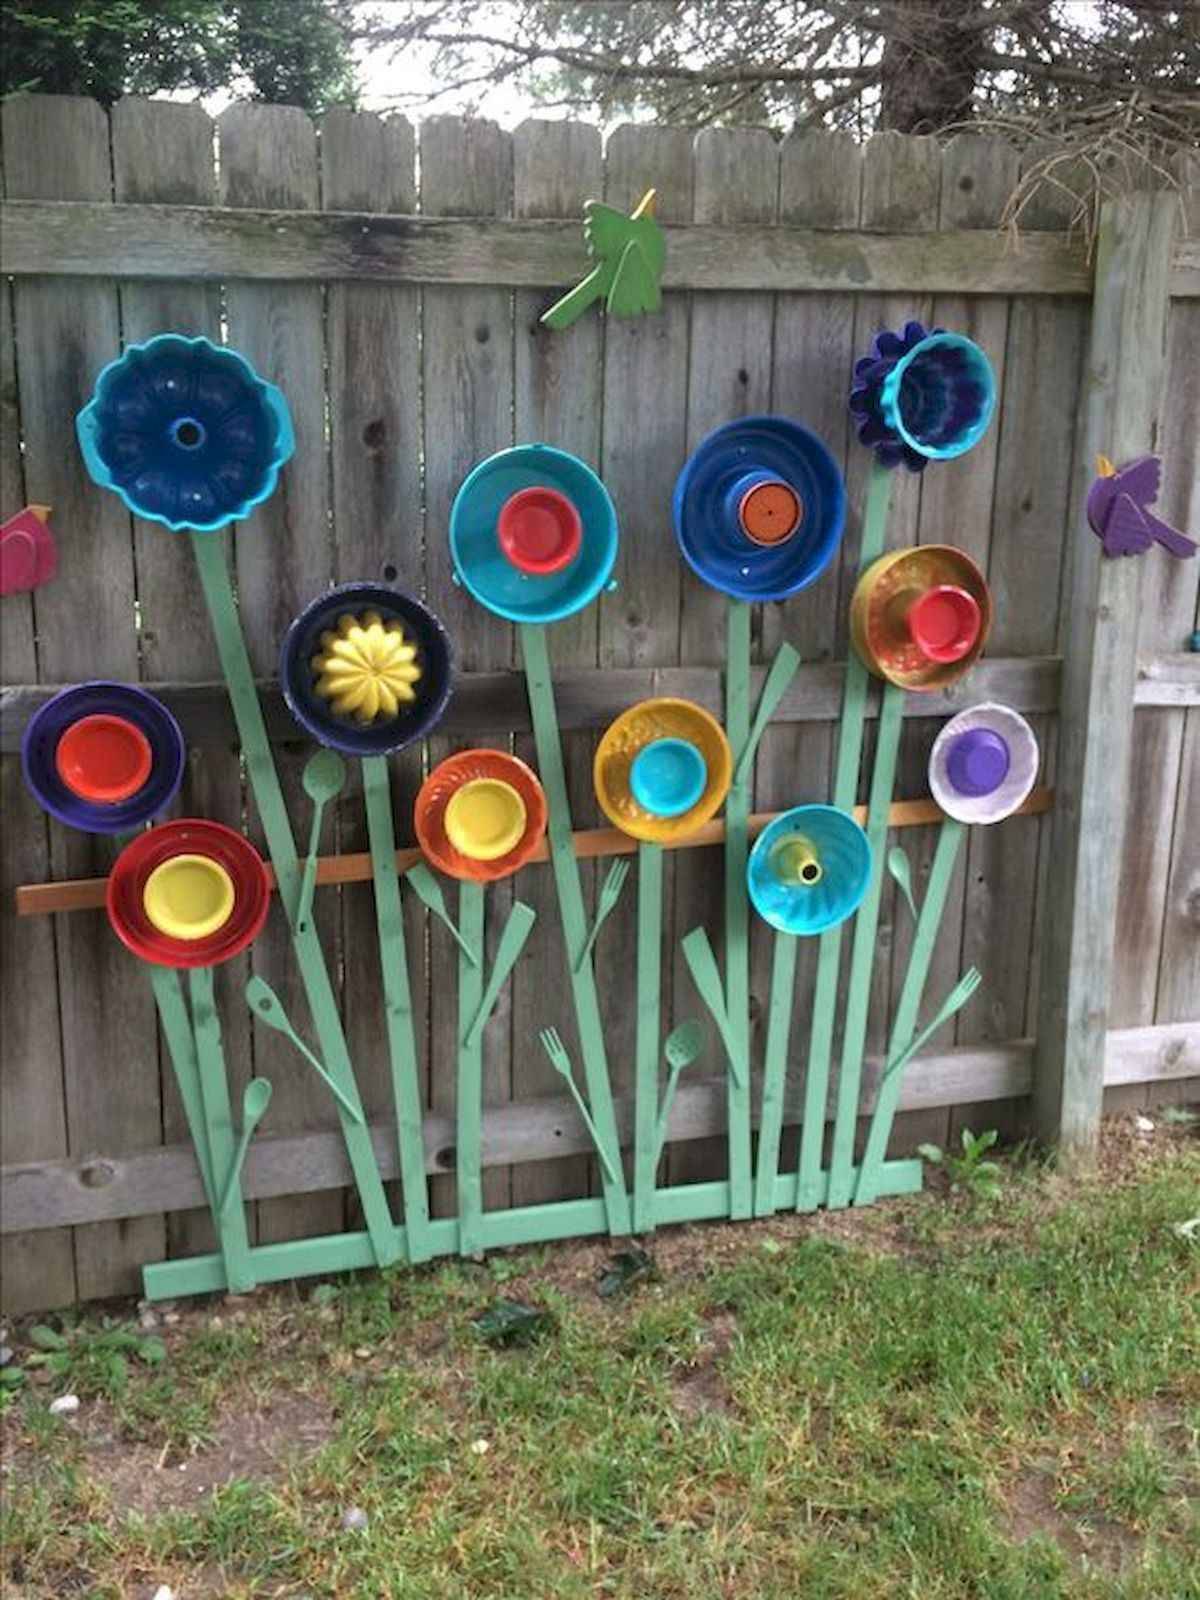 Truly Fascinating Low Budget Diy Garden Art Ideas You Need To Make